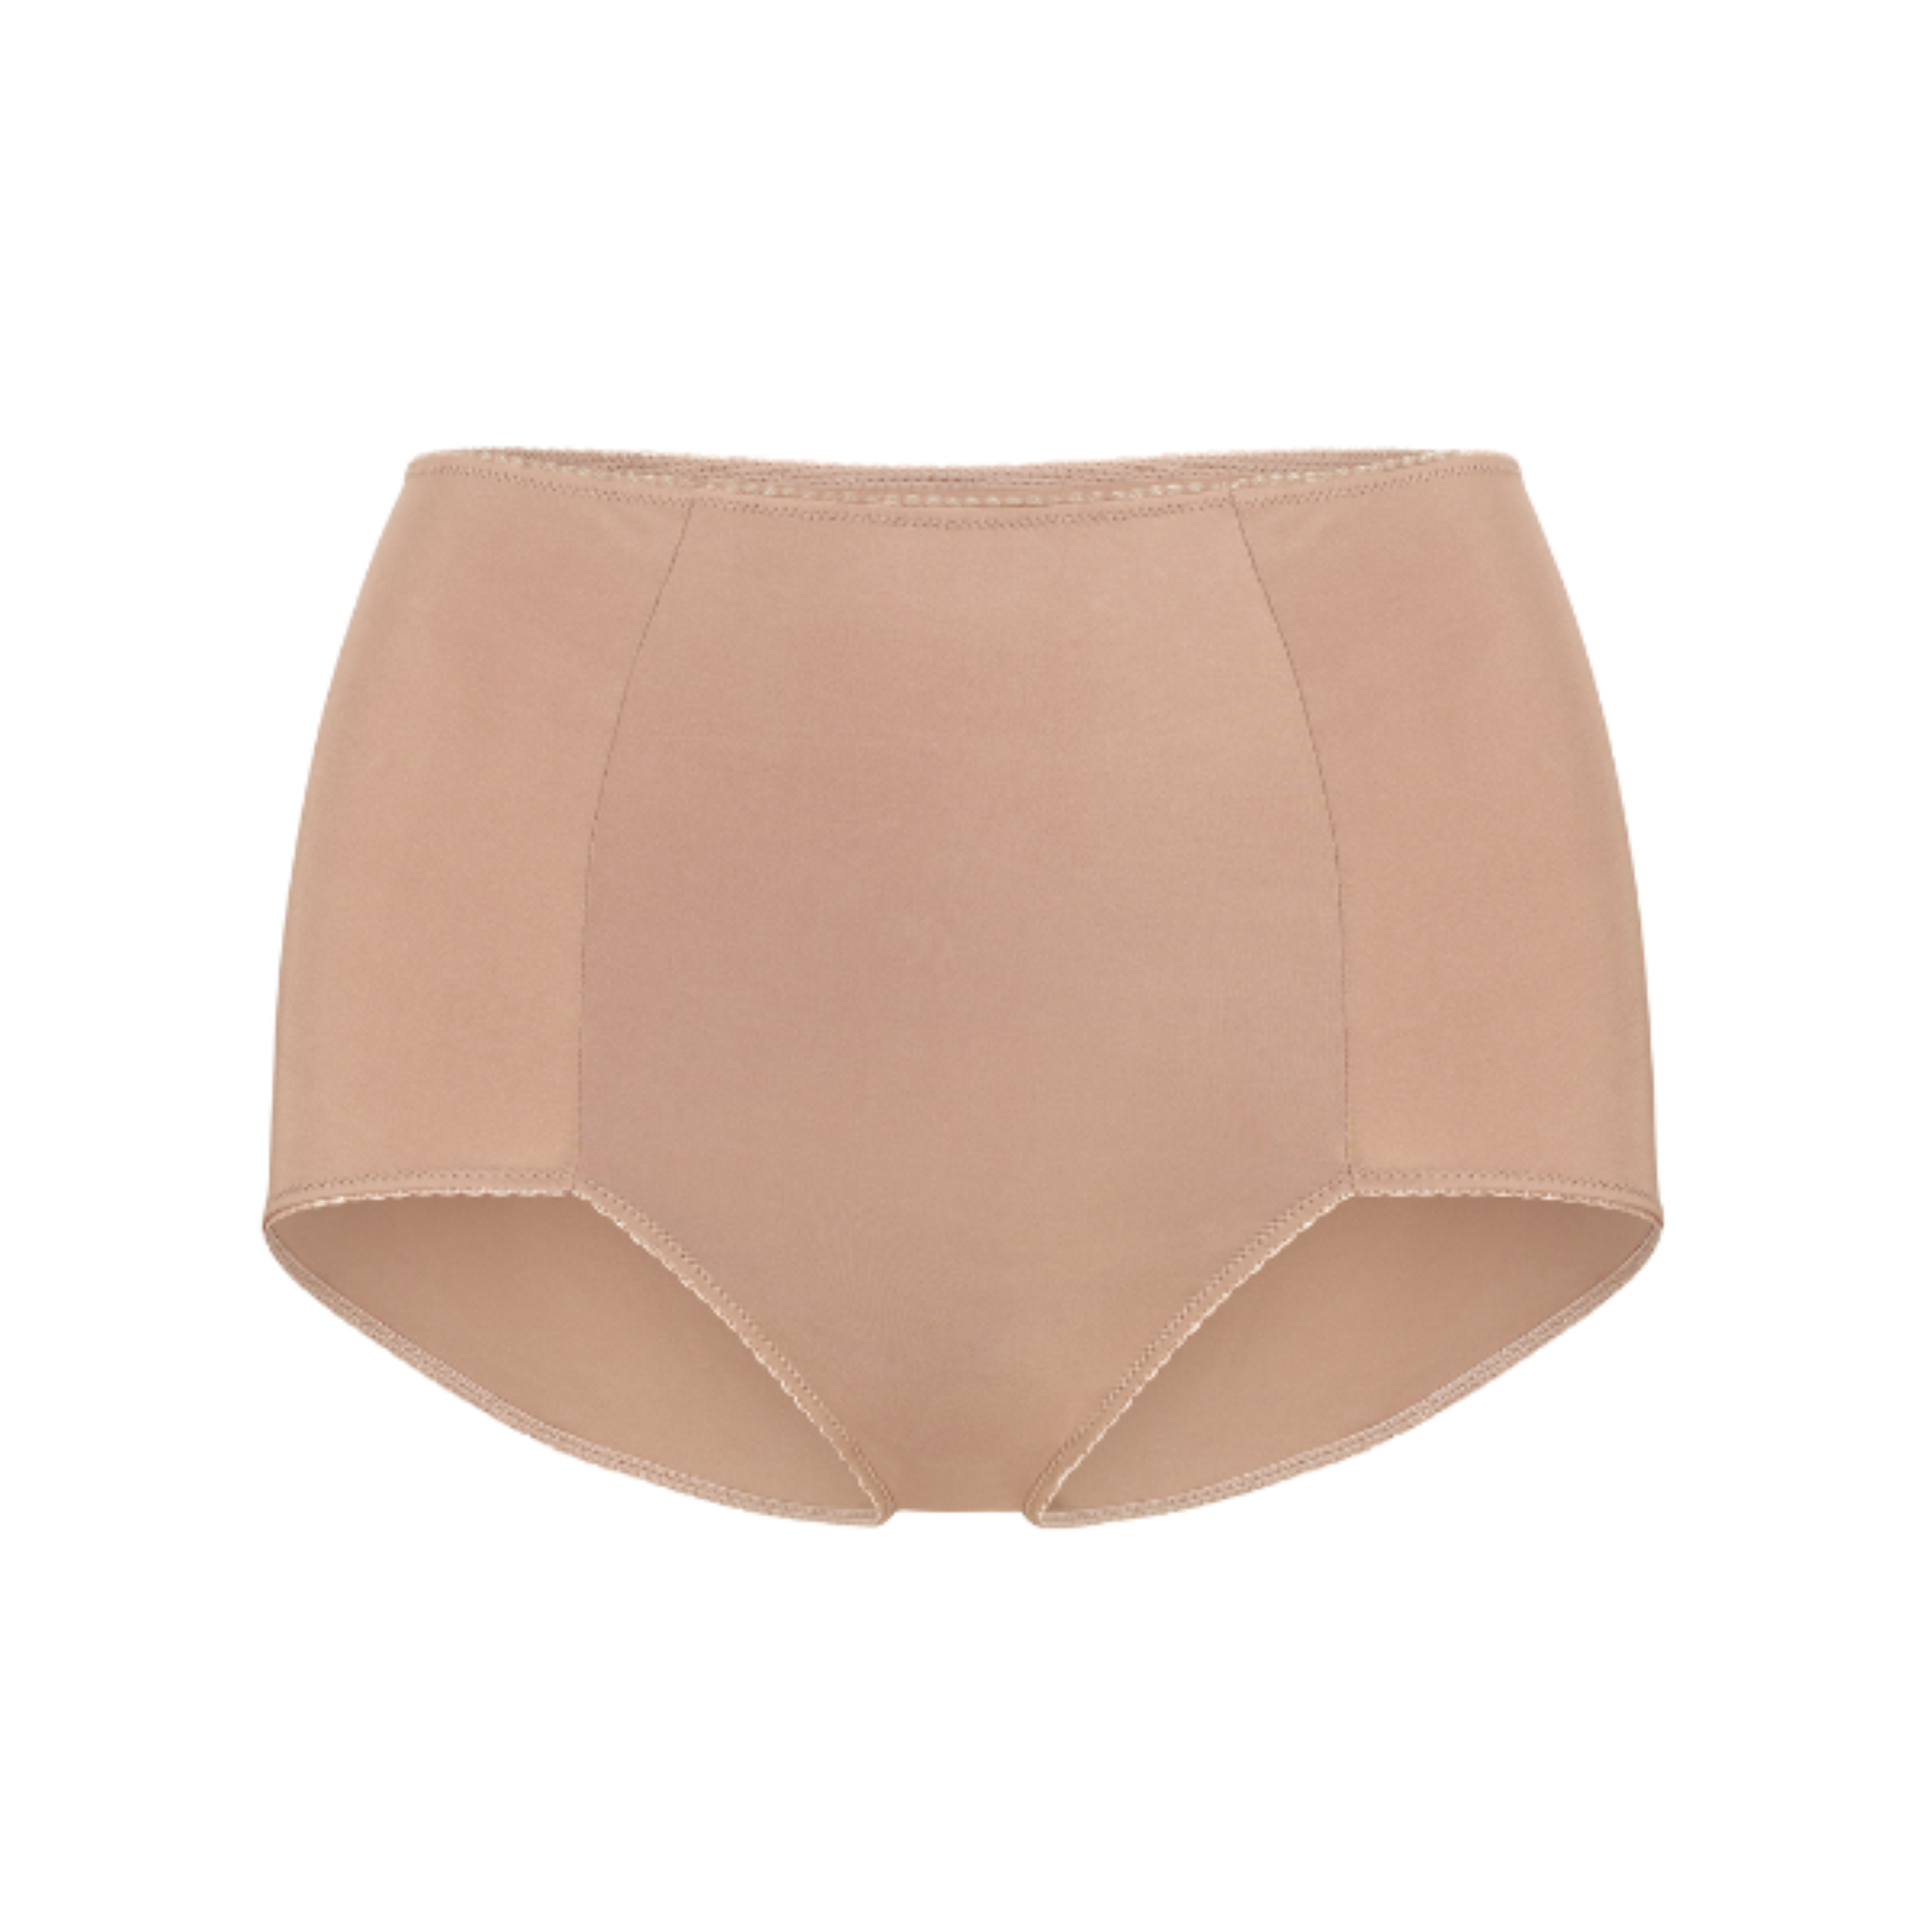 Marilyn Smoothing Brief Panty